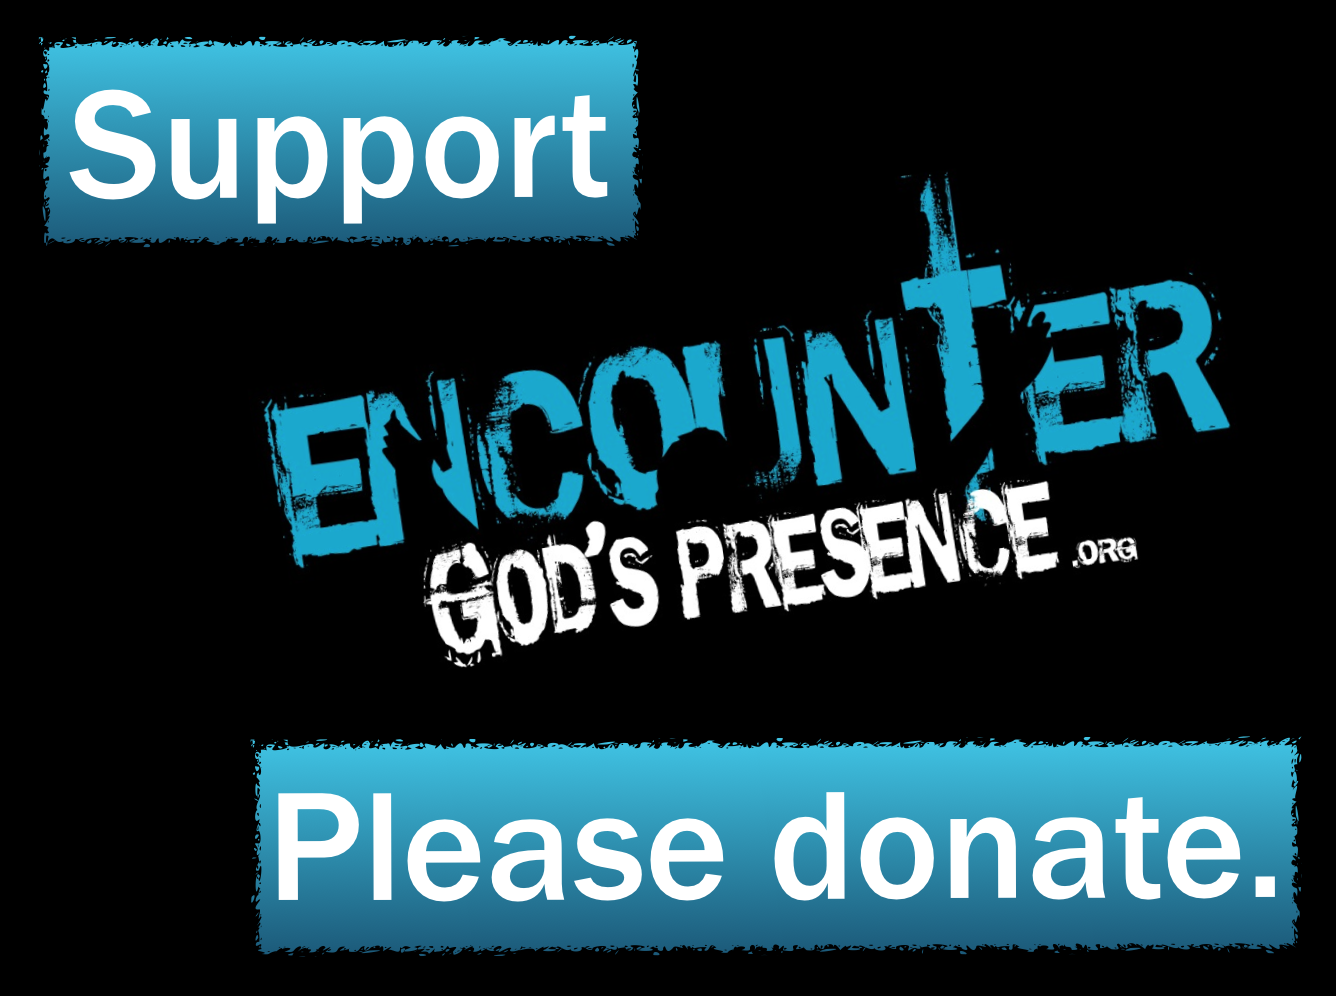 Donate & support Encounter